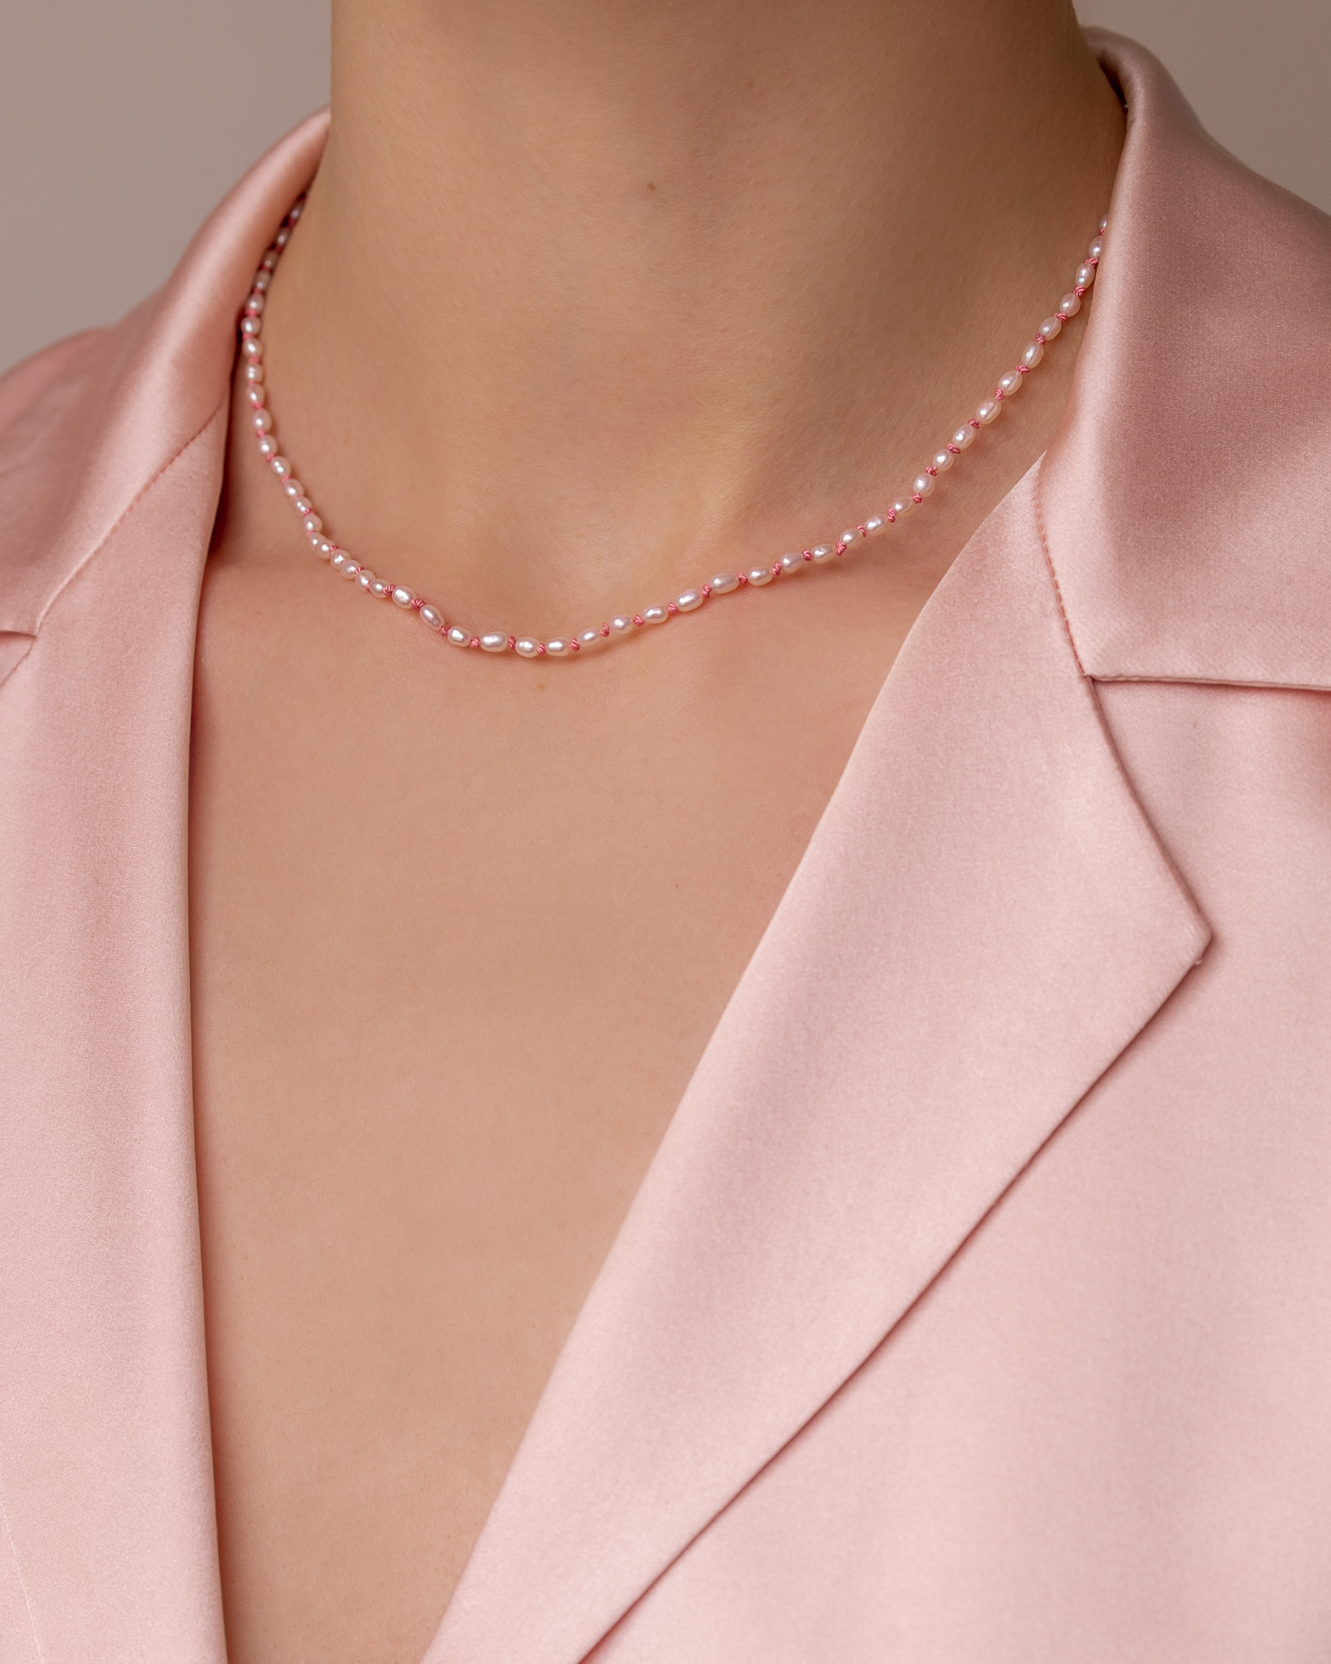 Dream Pearl Necklace Knotted on Pink Thread